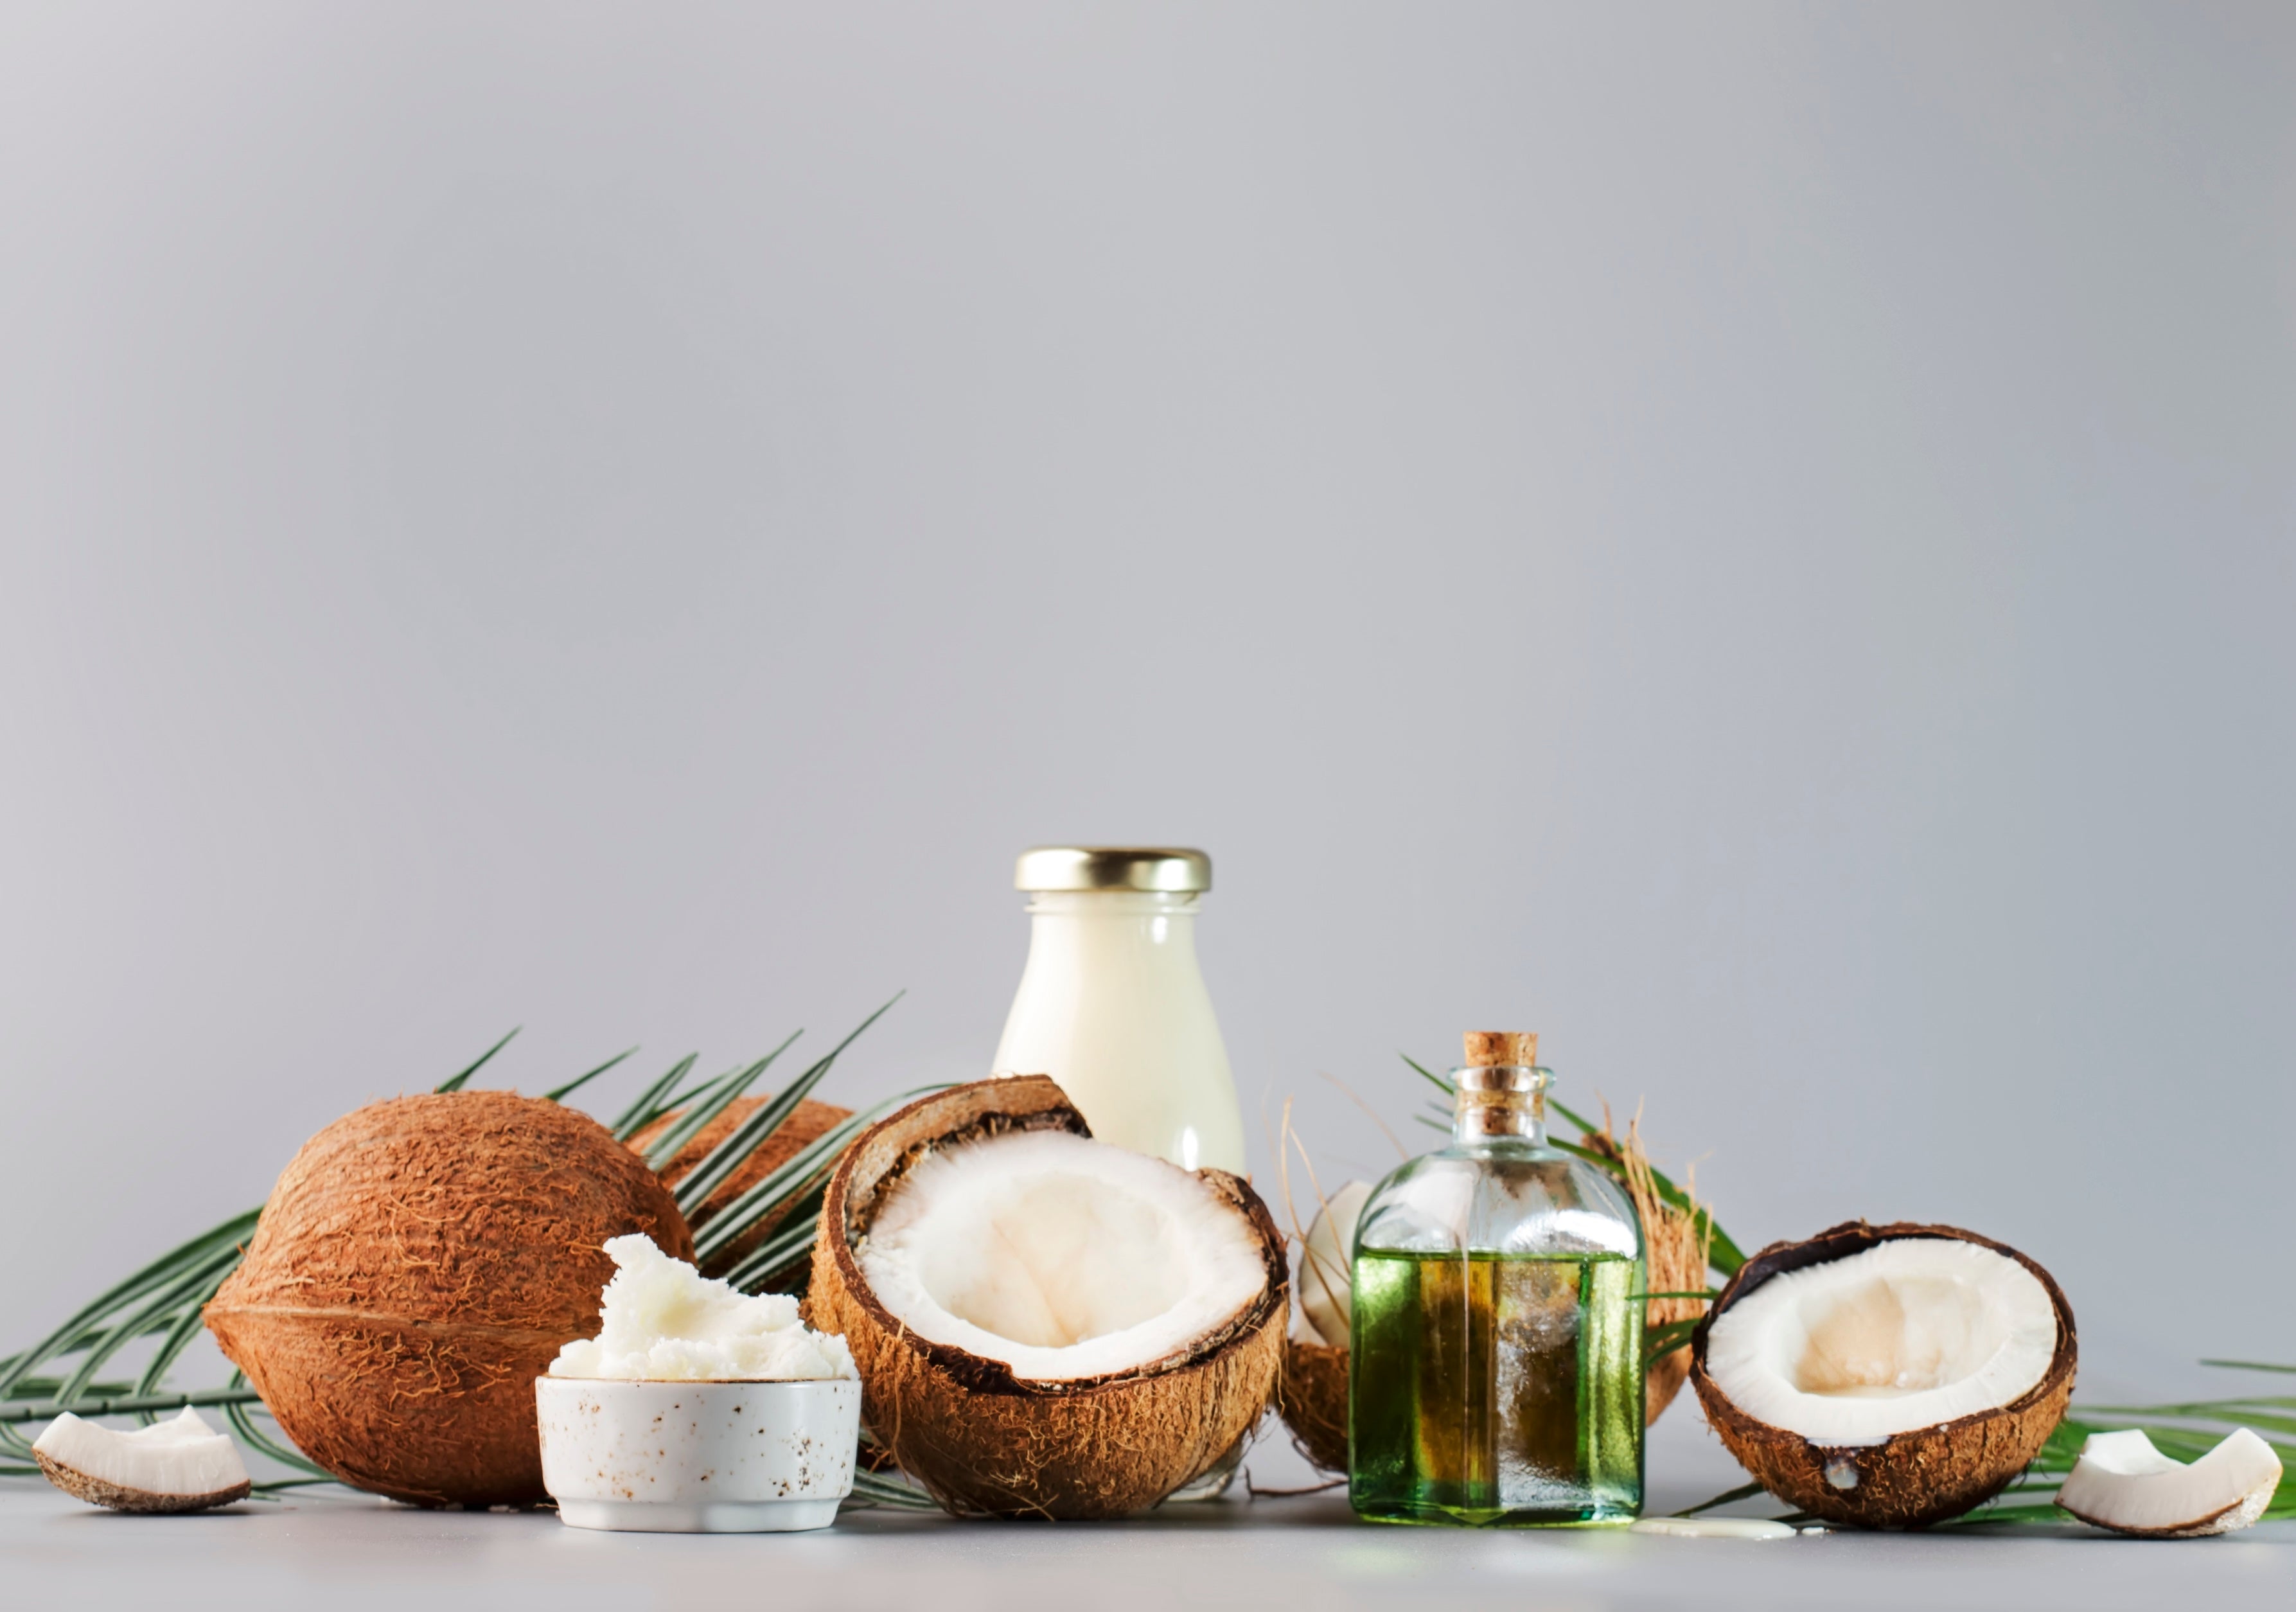 is coconut oil good for eczema?